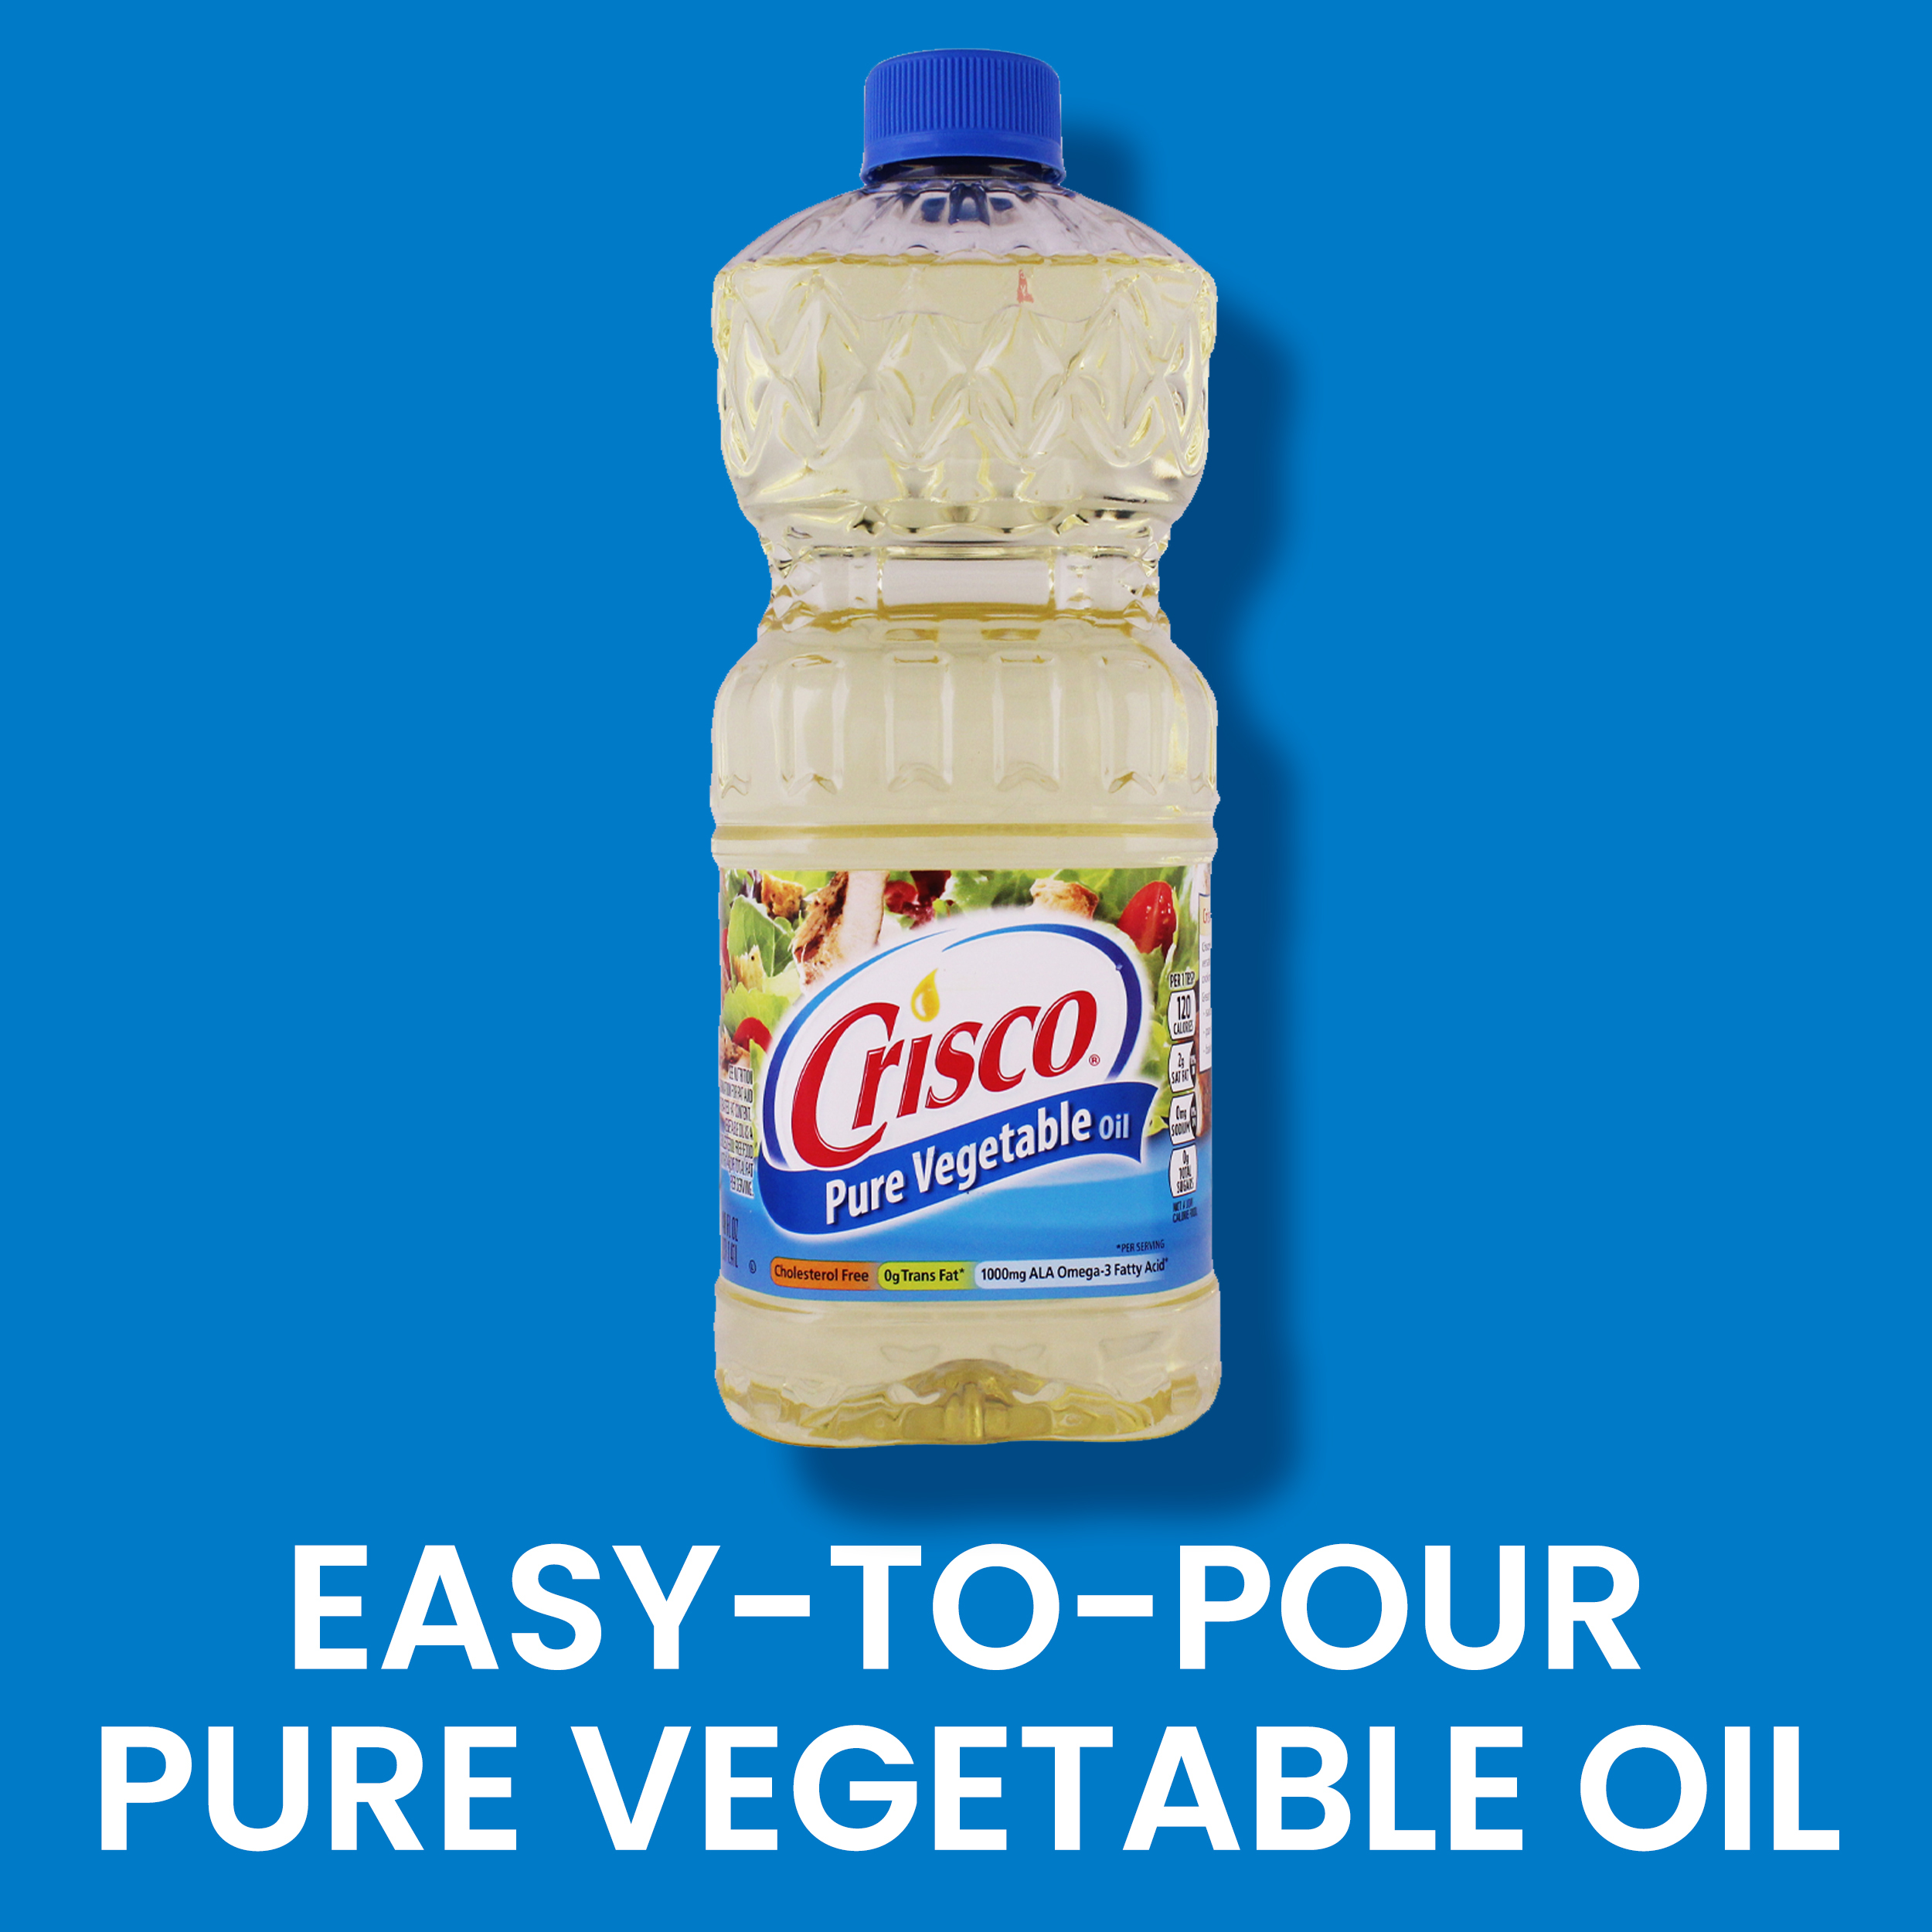 Crisco Pure Vegetable Cooking Oil, 40 fl oz - image 4 of 11